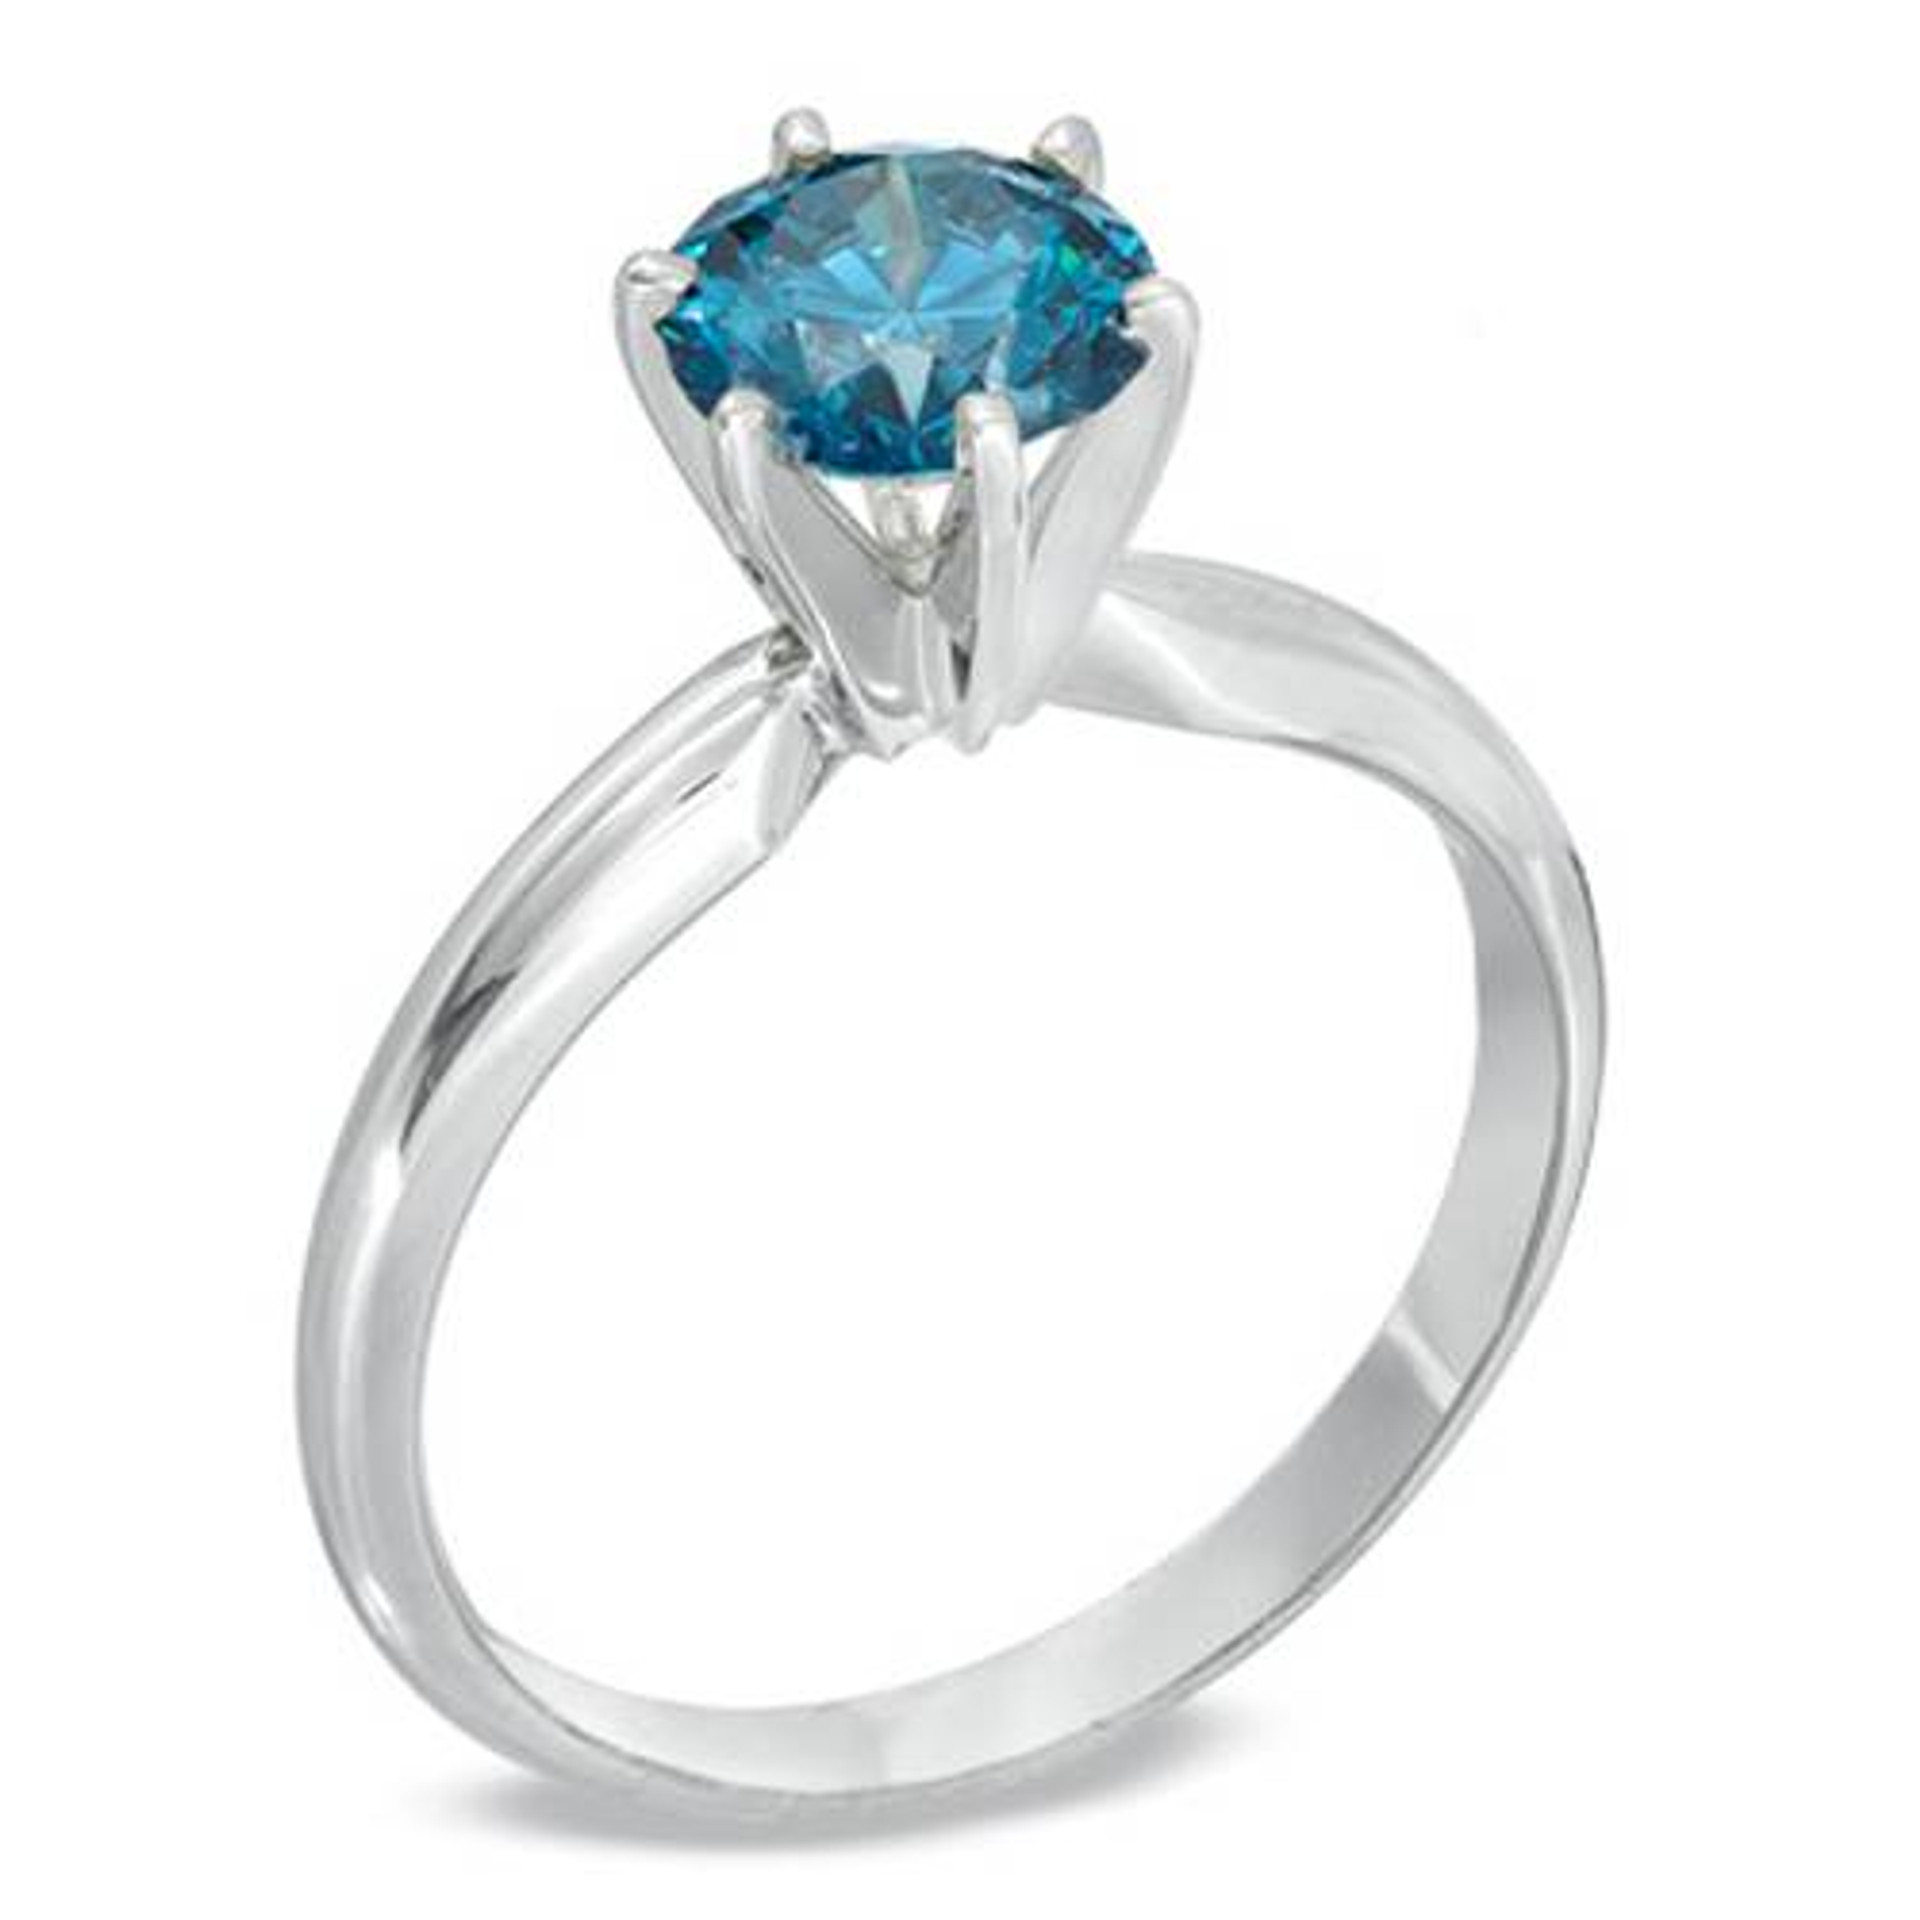 1ct Treated Blue Diamond Solitaire Engagement Ring 14K White Gold